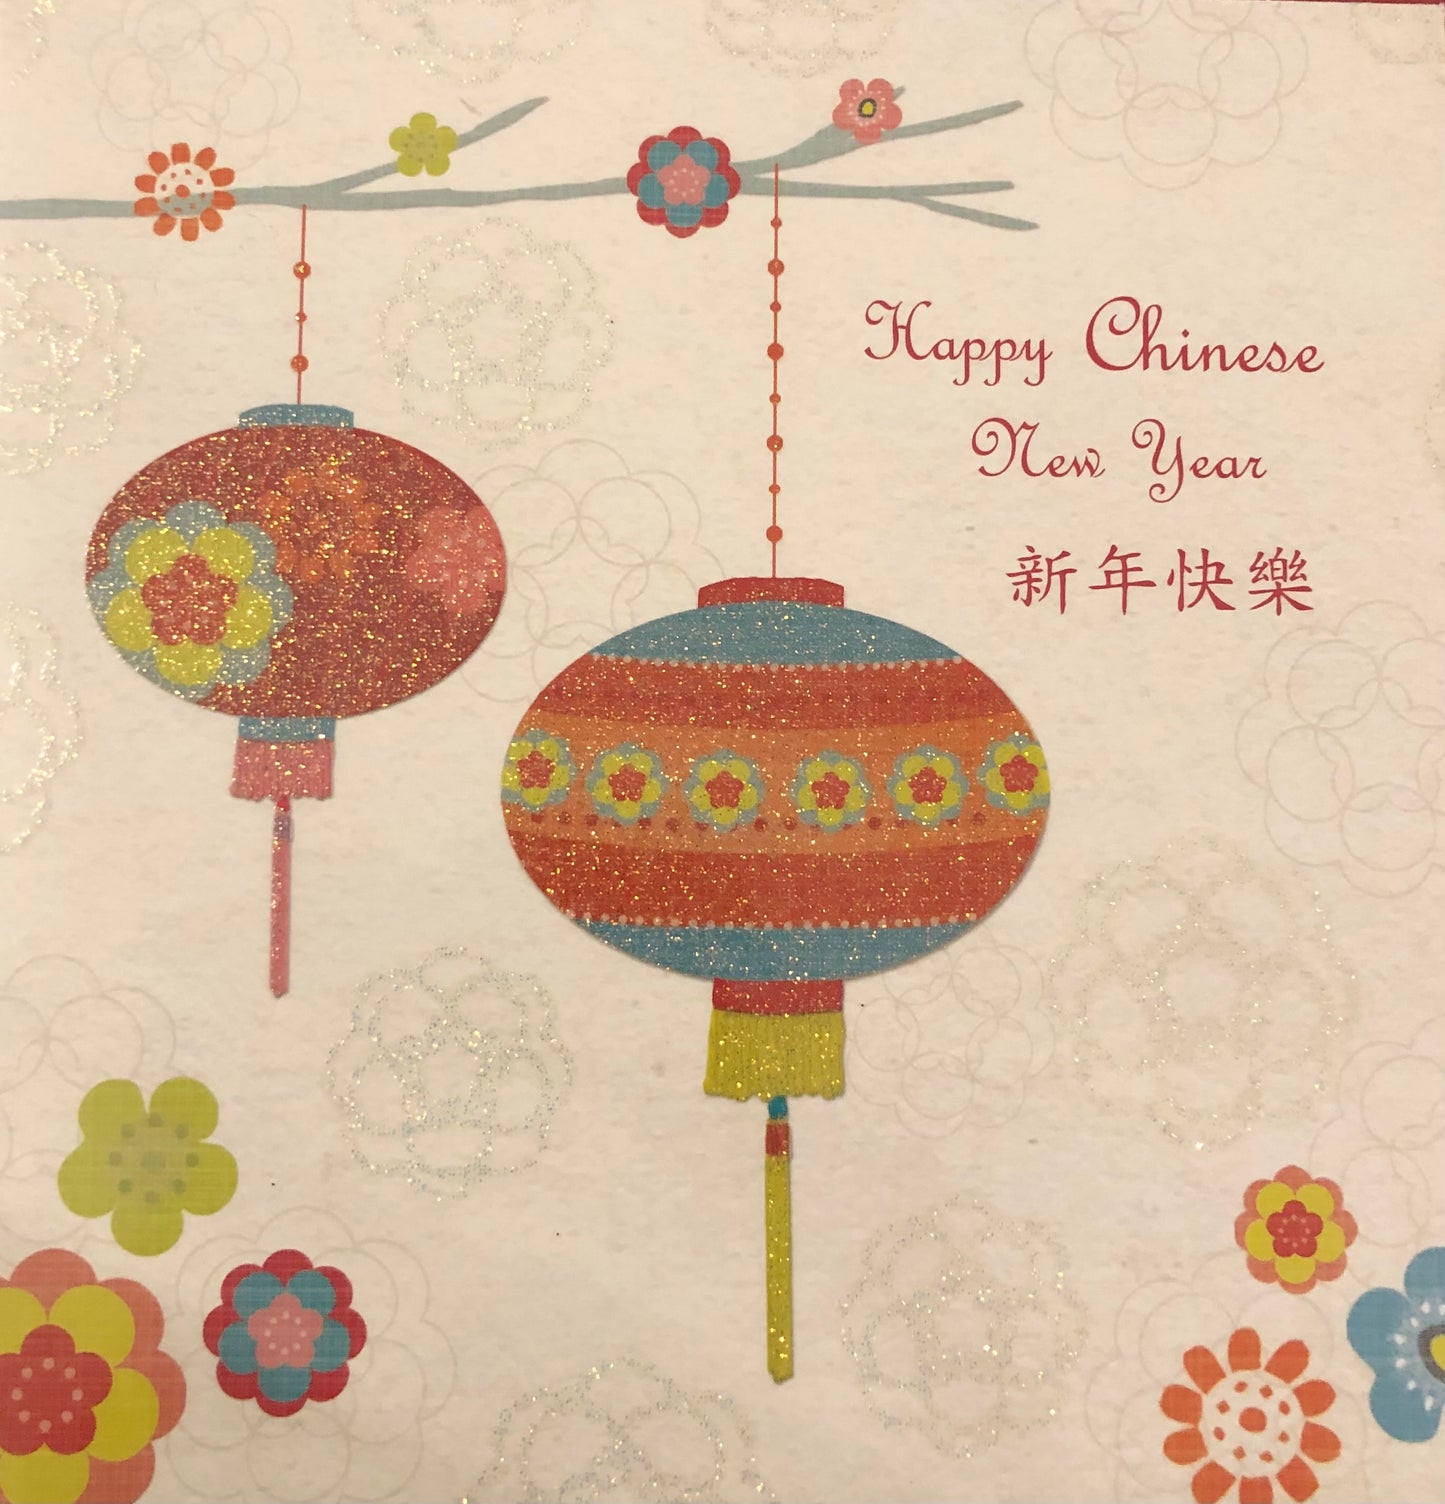 Two Lanterns (Chinese New Year Card).